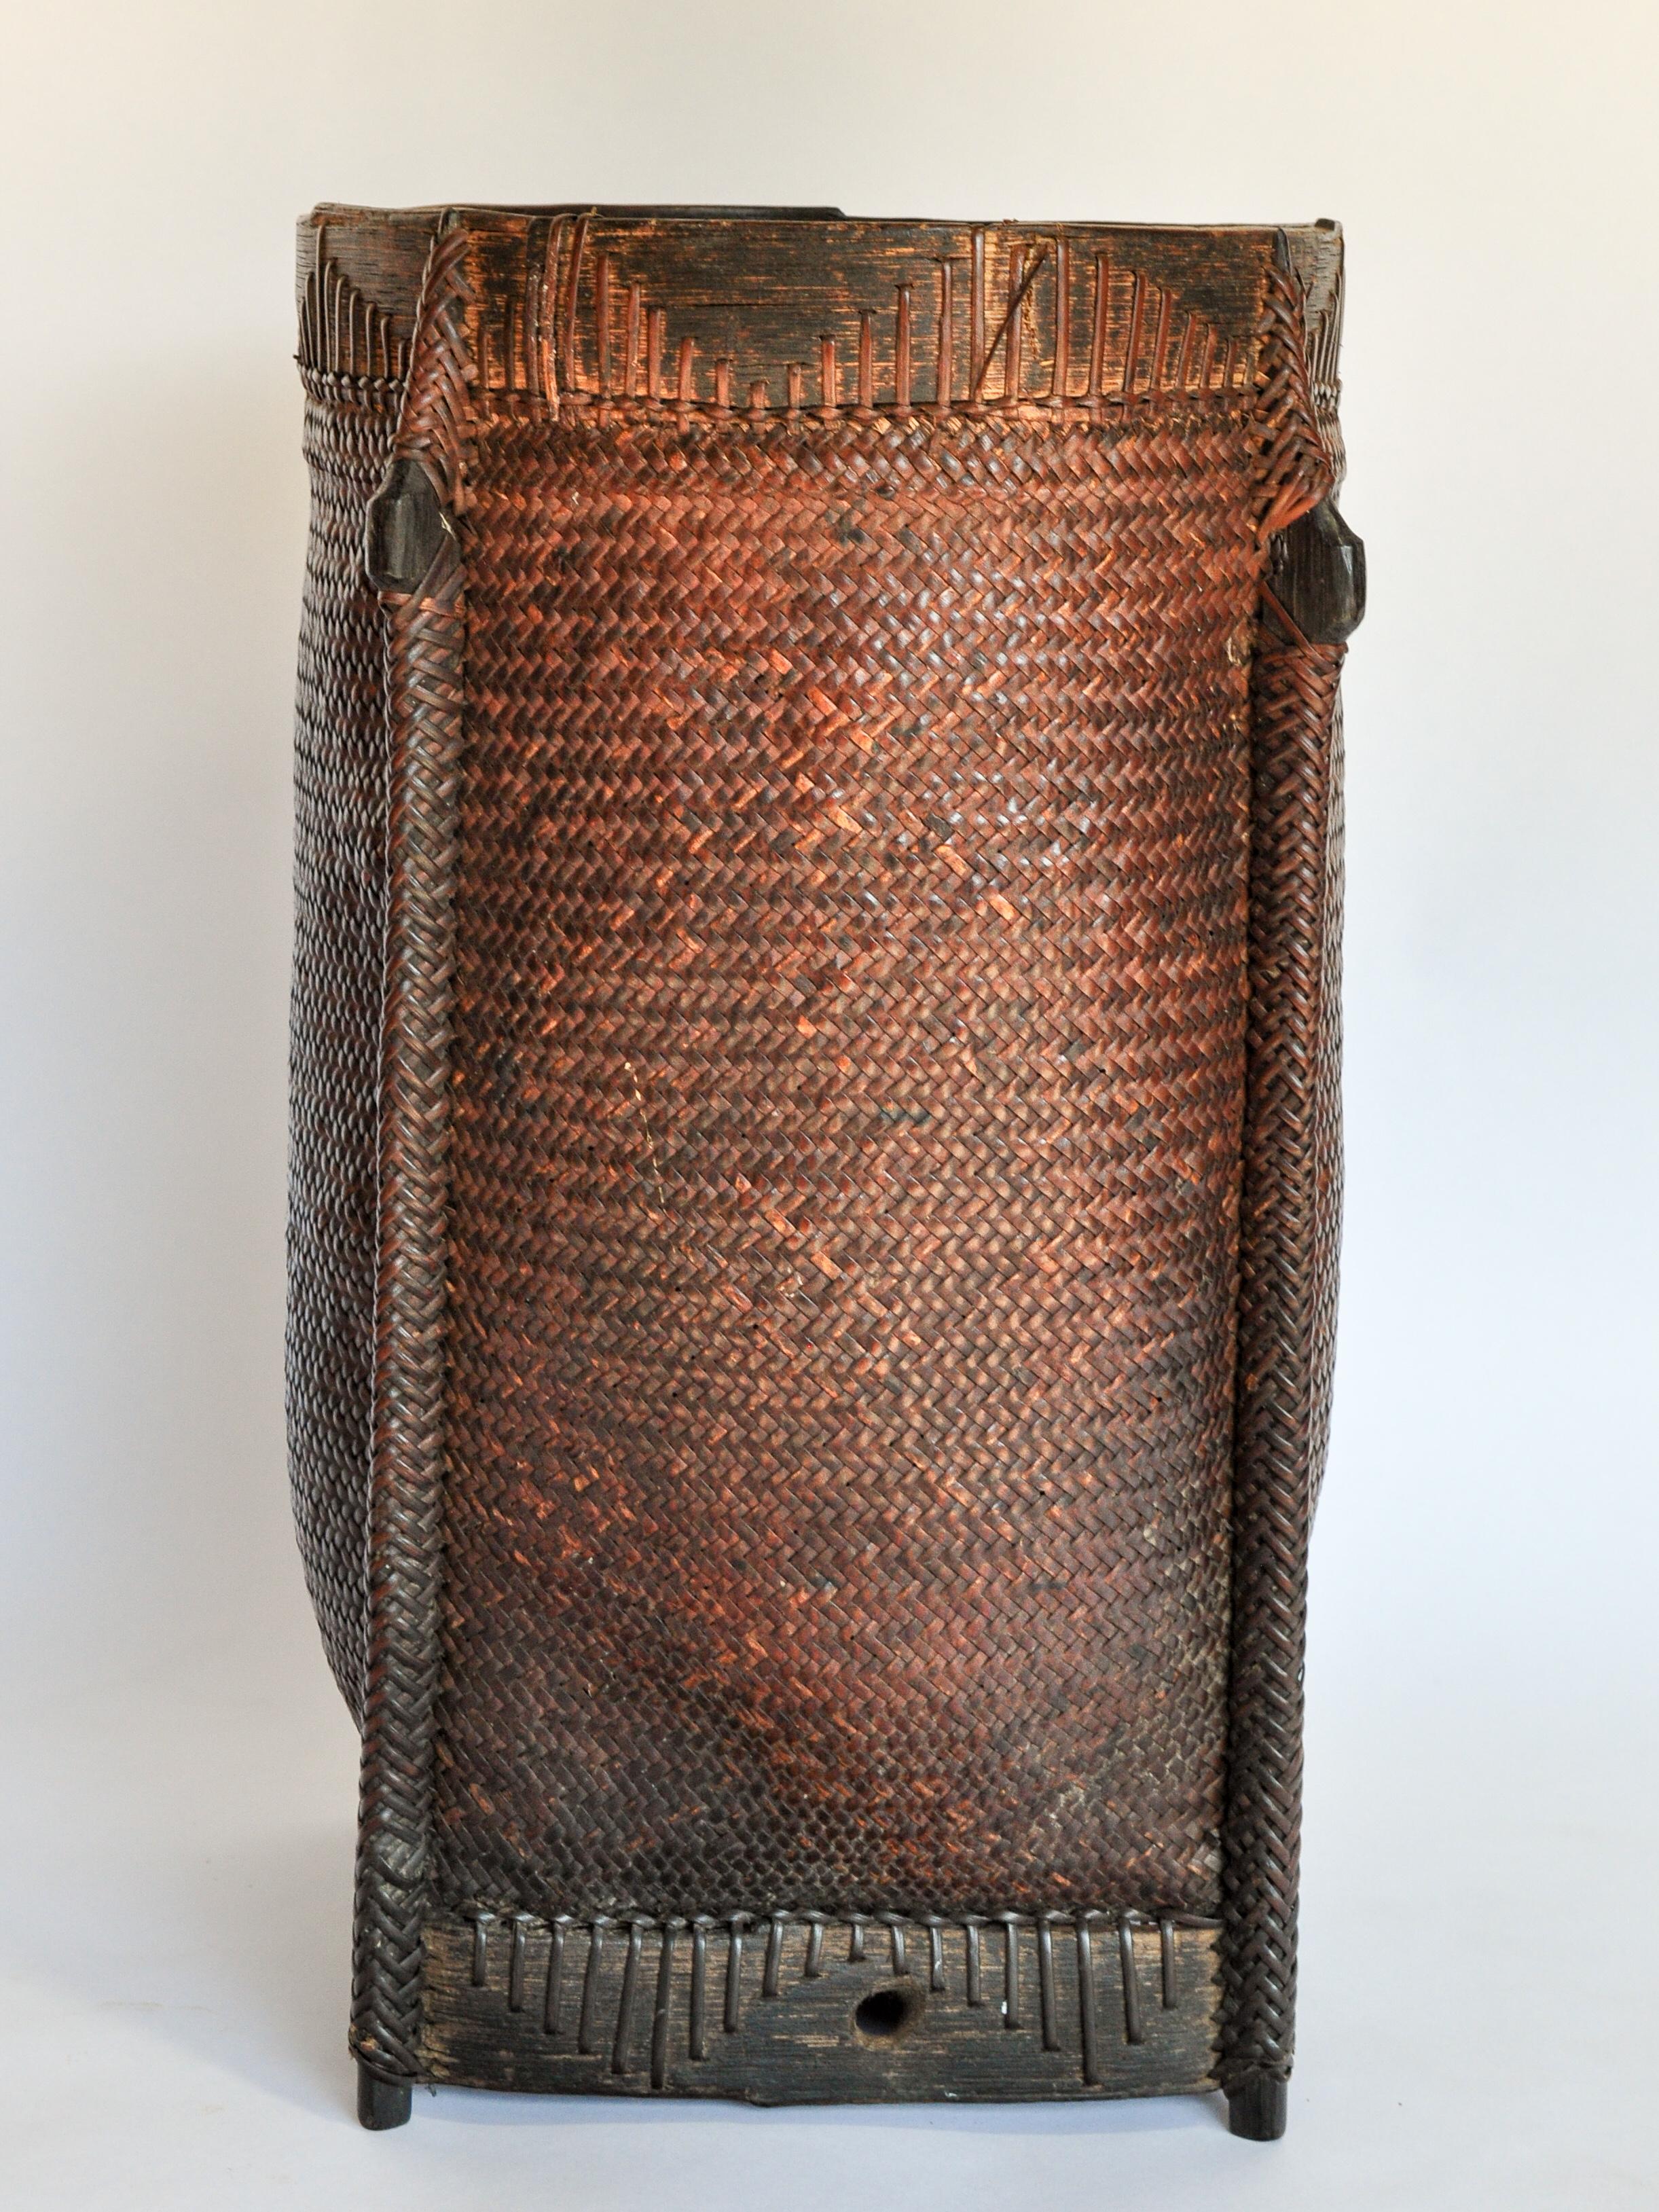 Bamboo Tribal Carrying and Storage Basket from Borneo, Mid-20th Century